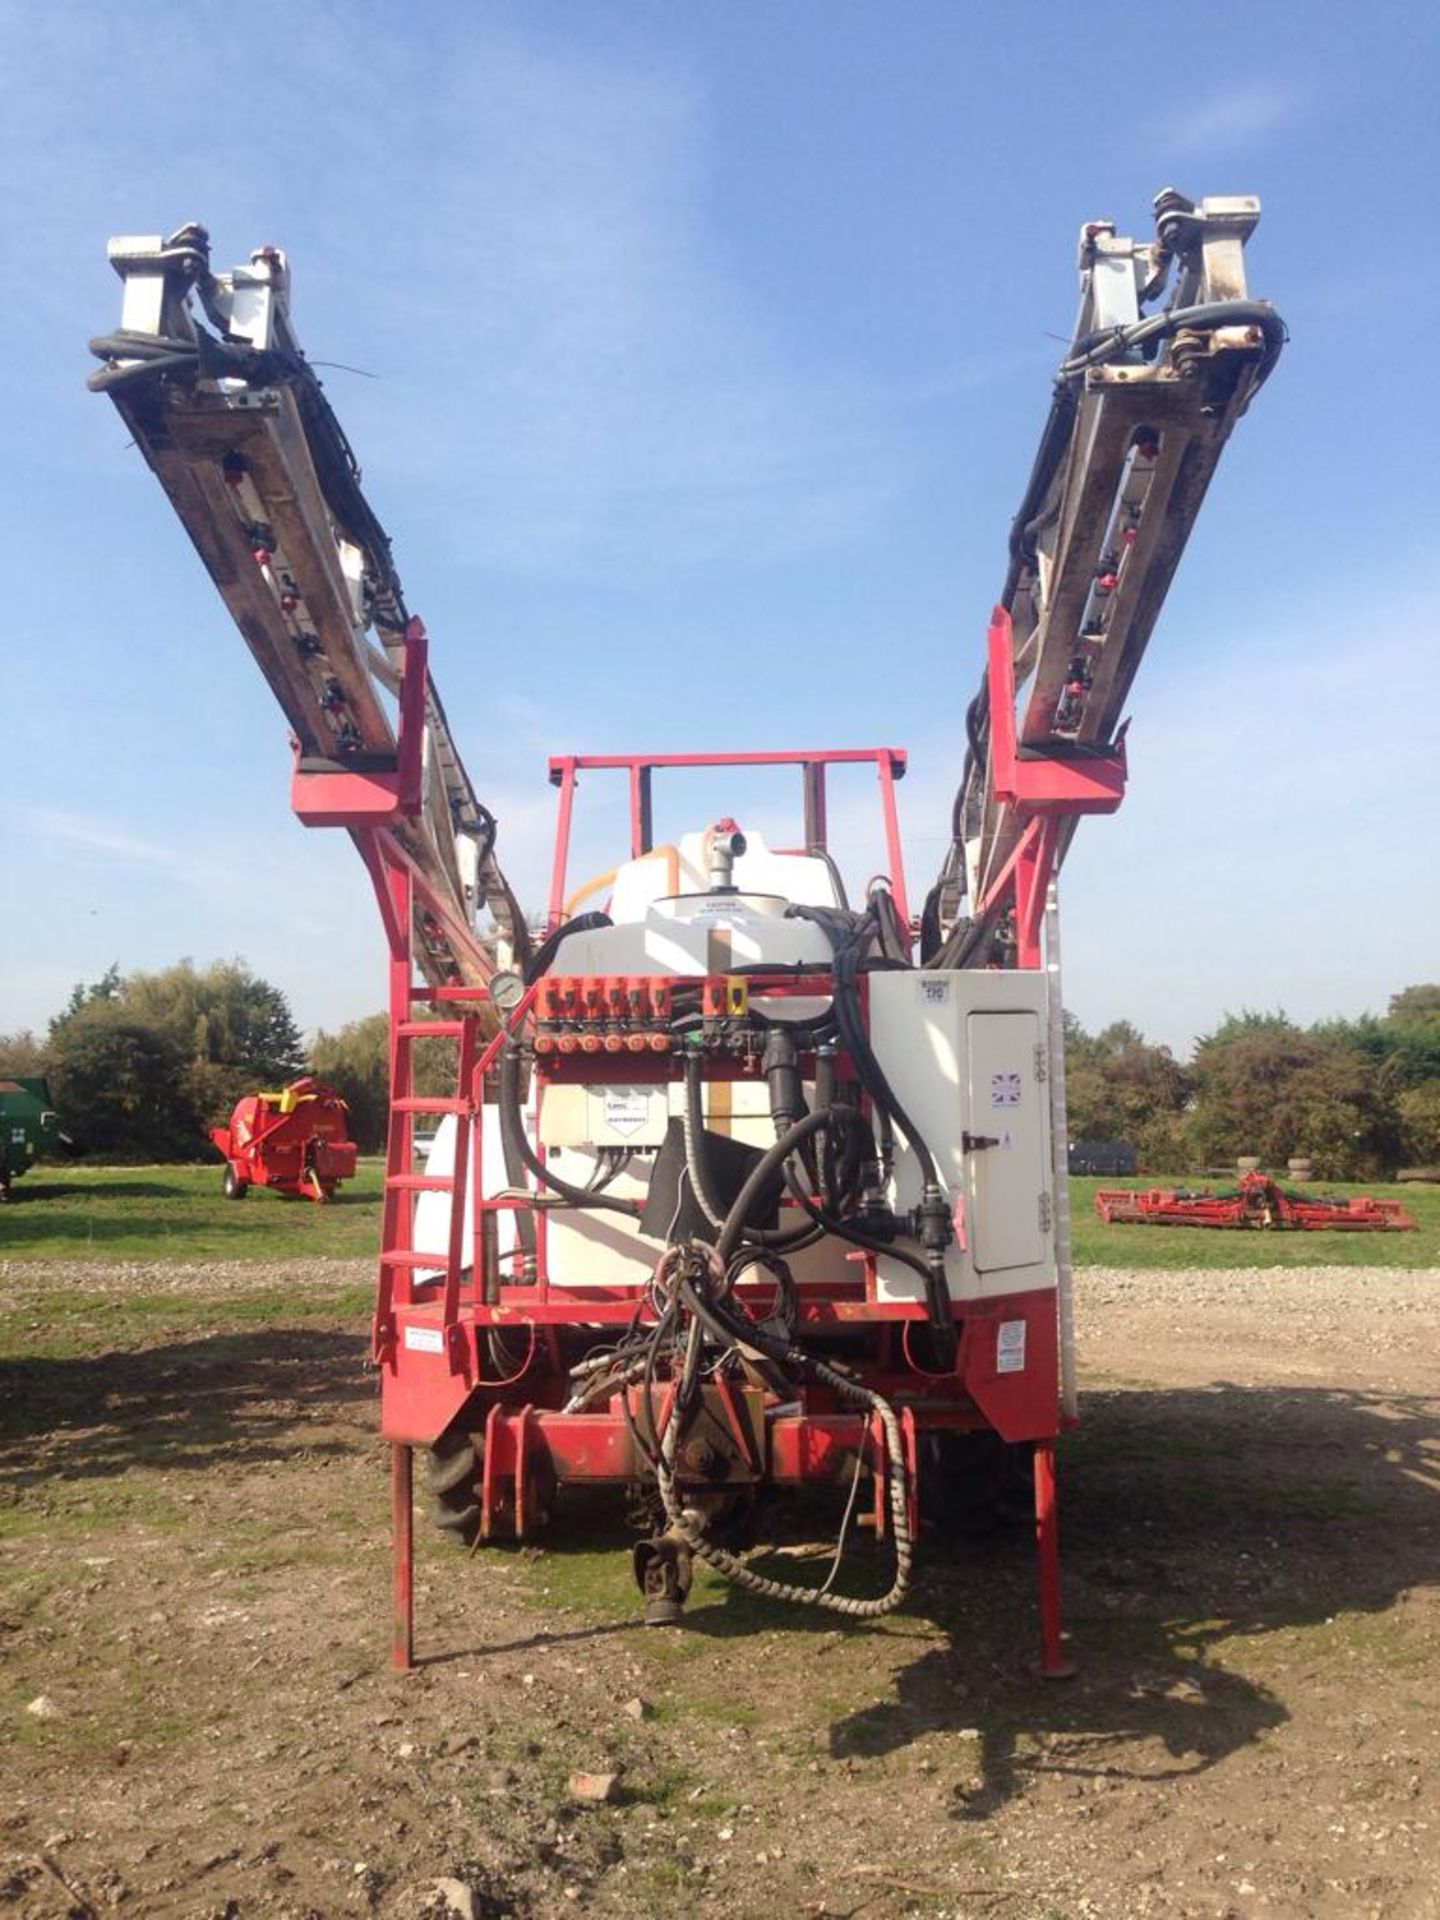 2008 Landquip 3500 Trailed Sprayer, 24m, 3500L Tank, 300L Clean Water, Tracking Steering, 6 Section - Image 5 of 6